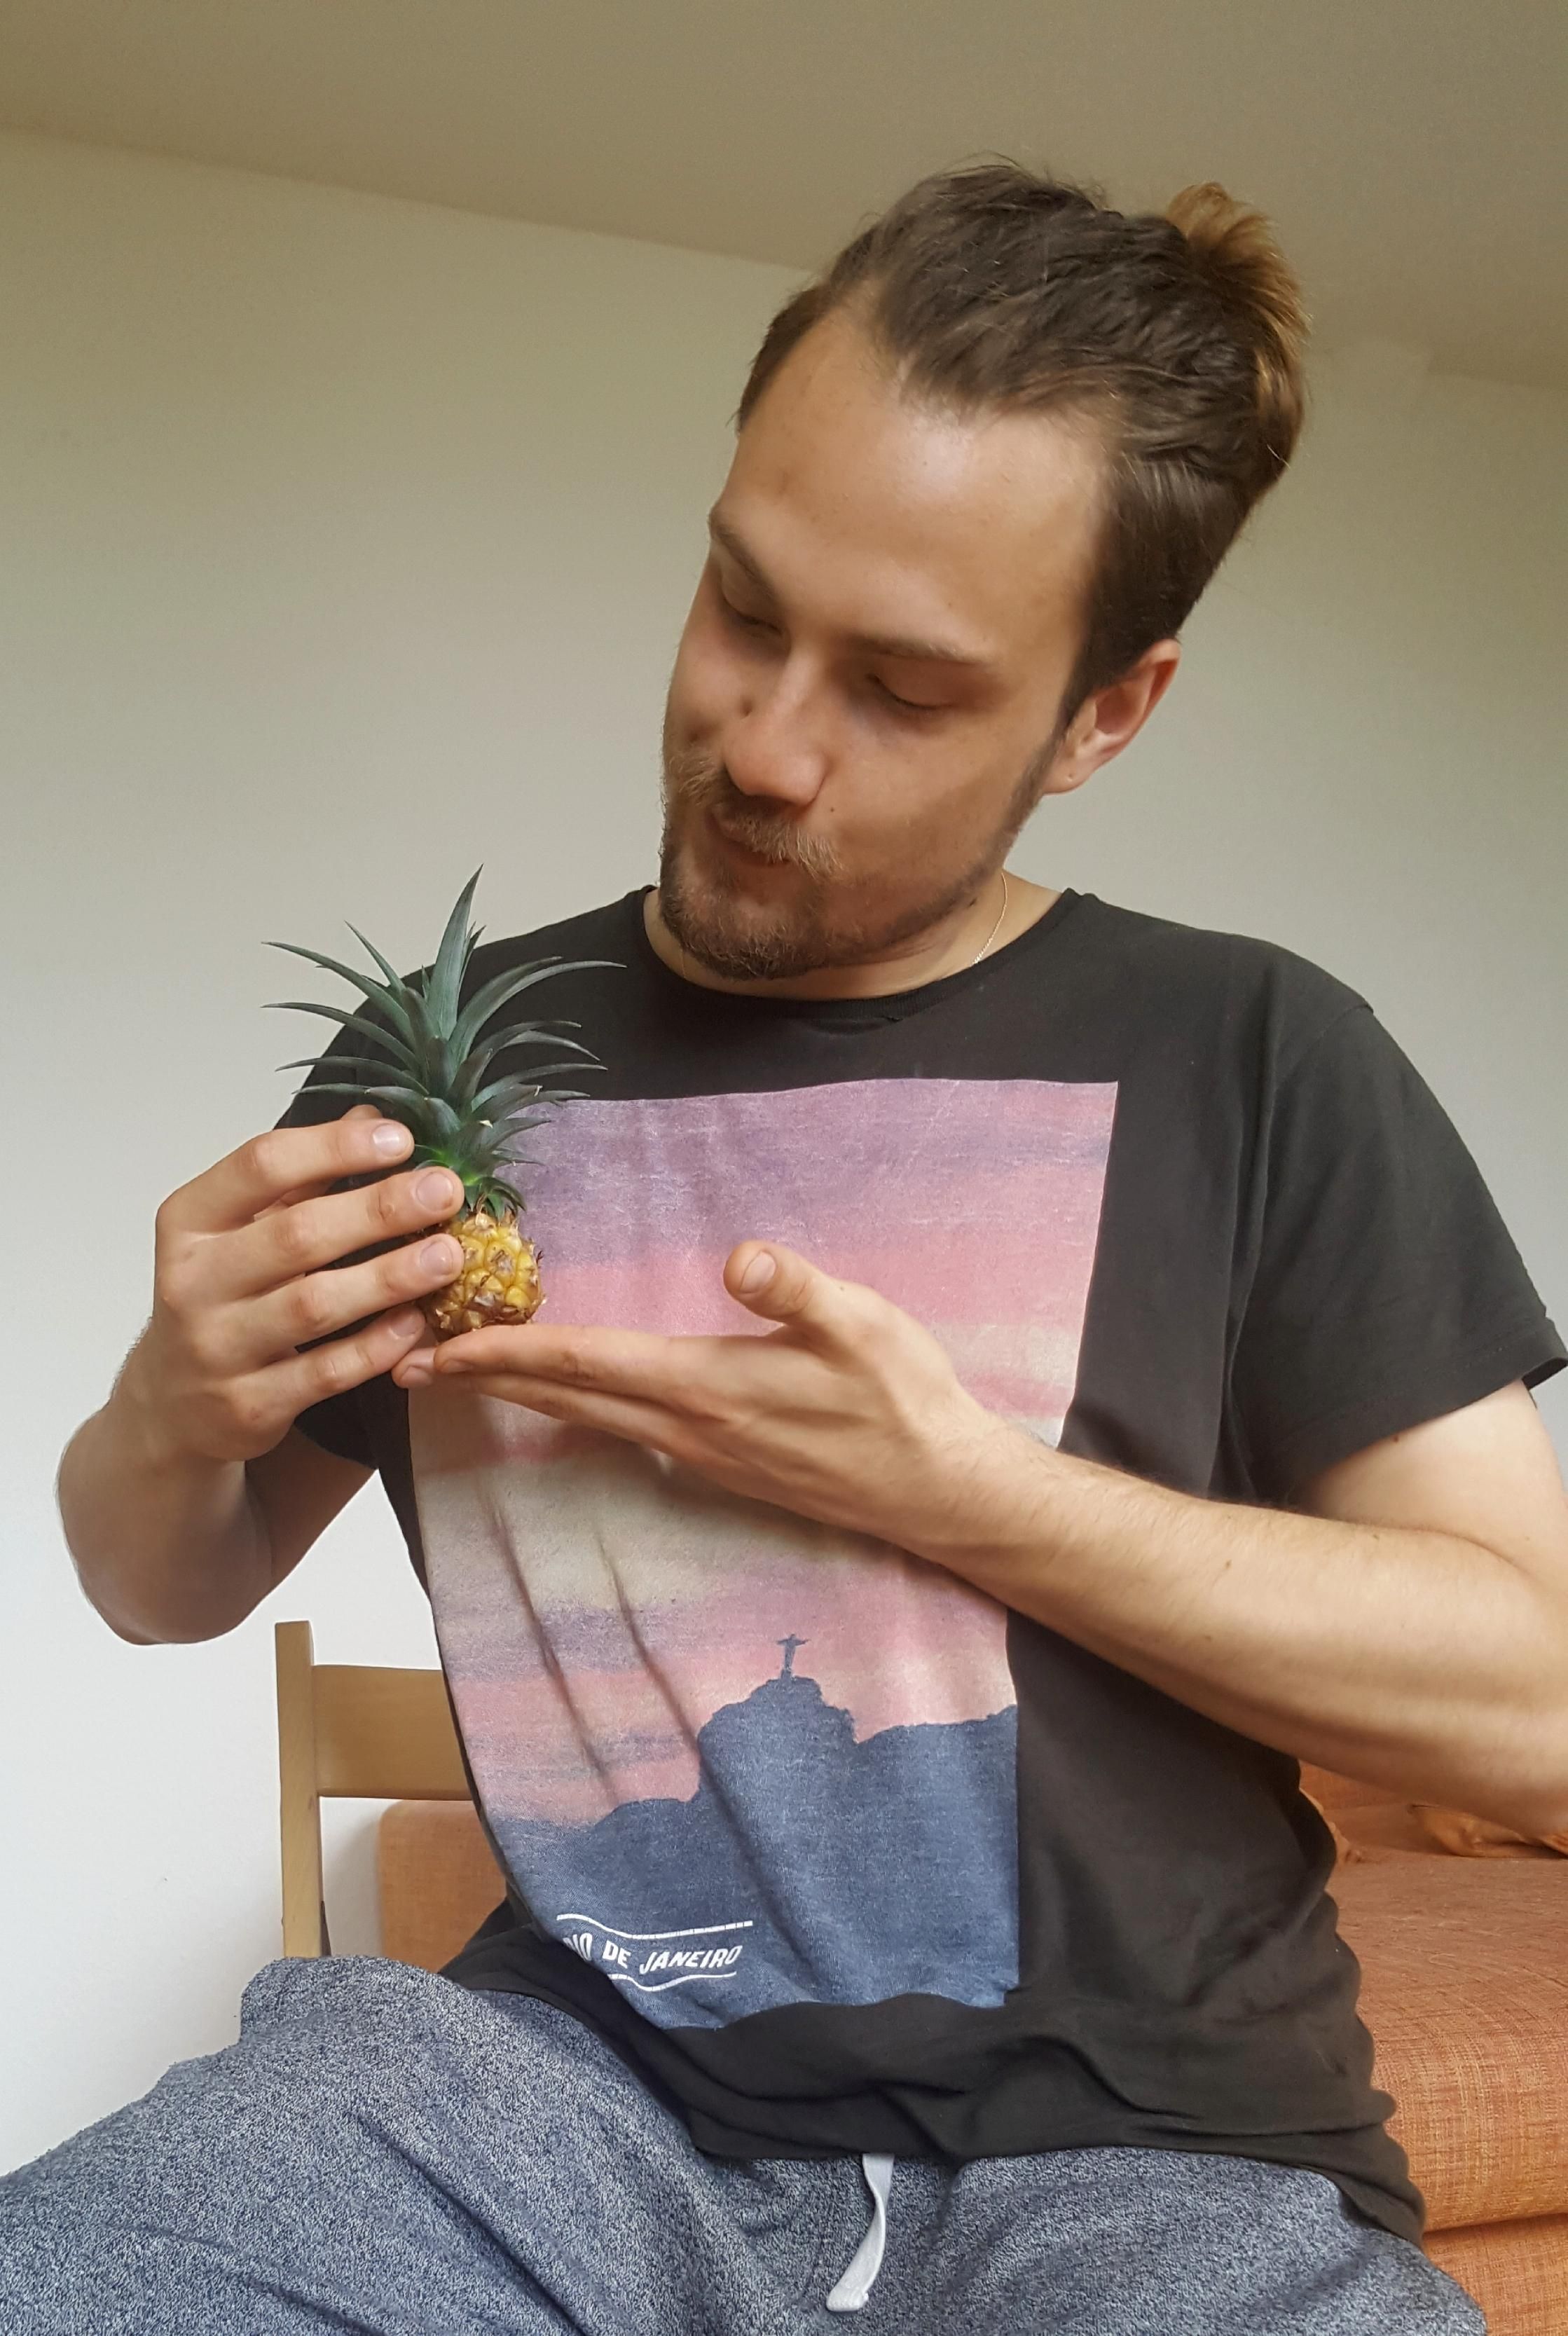 I too tried to grow my own pineapple, but unfortunately my dad skill isn't high enough yet.